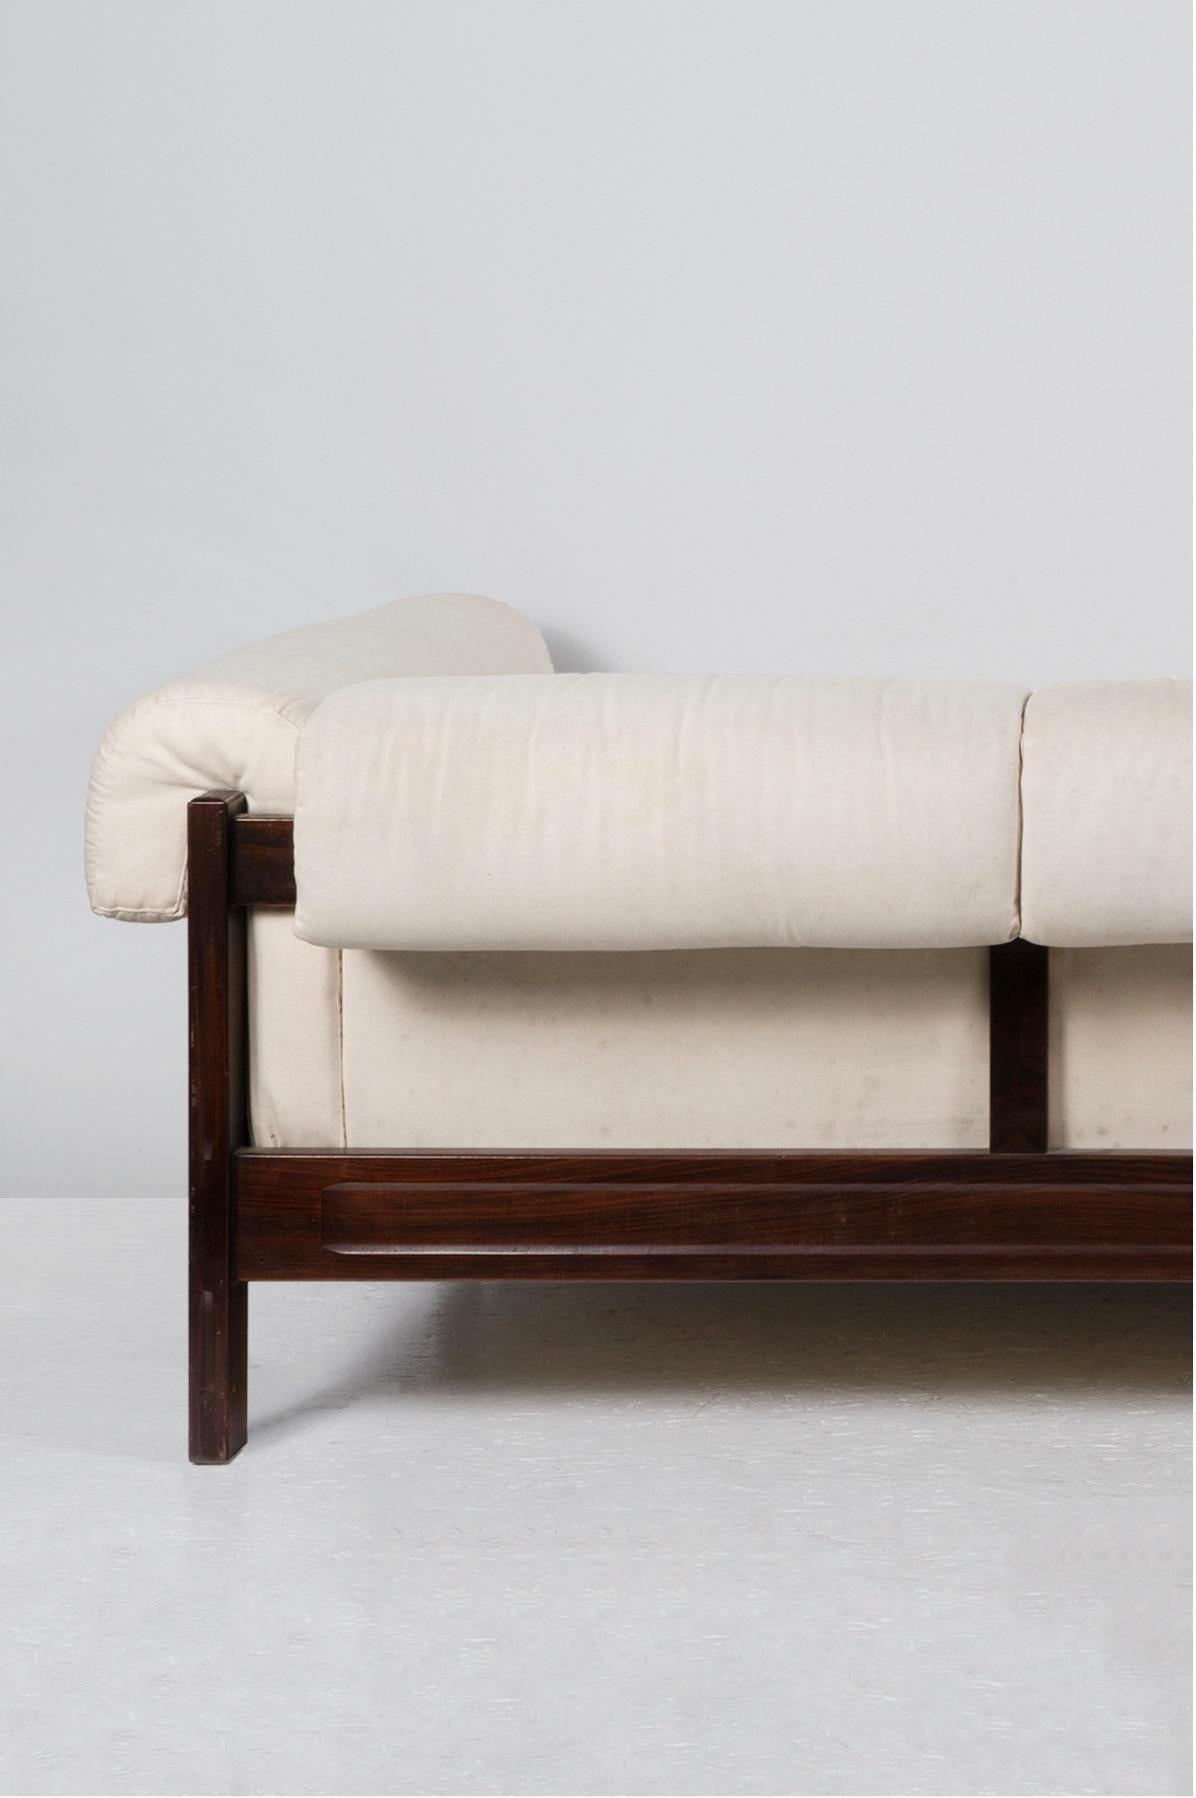 Sofa with wooden frame and white cotton fabric. This famous model called Veronica was published in Domus magazine, No. 409, December 1963, p. 74/75. This was a very important publication for the design sector, listing the best creations of the